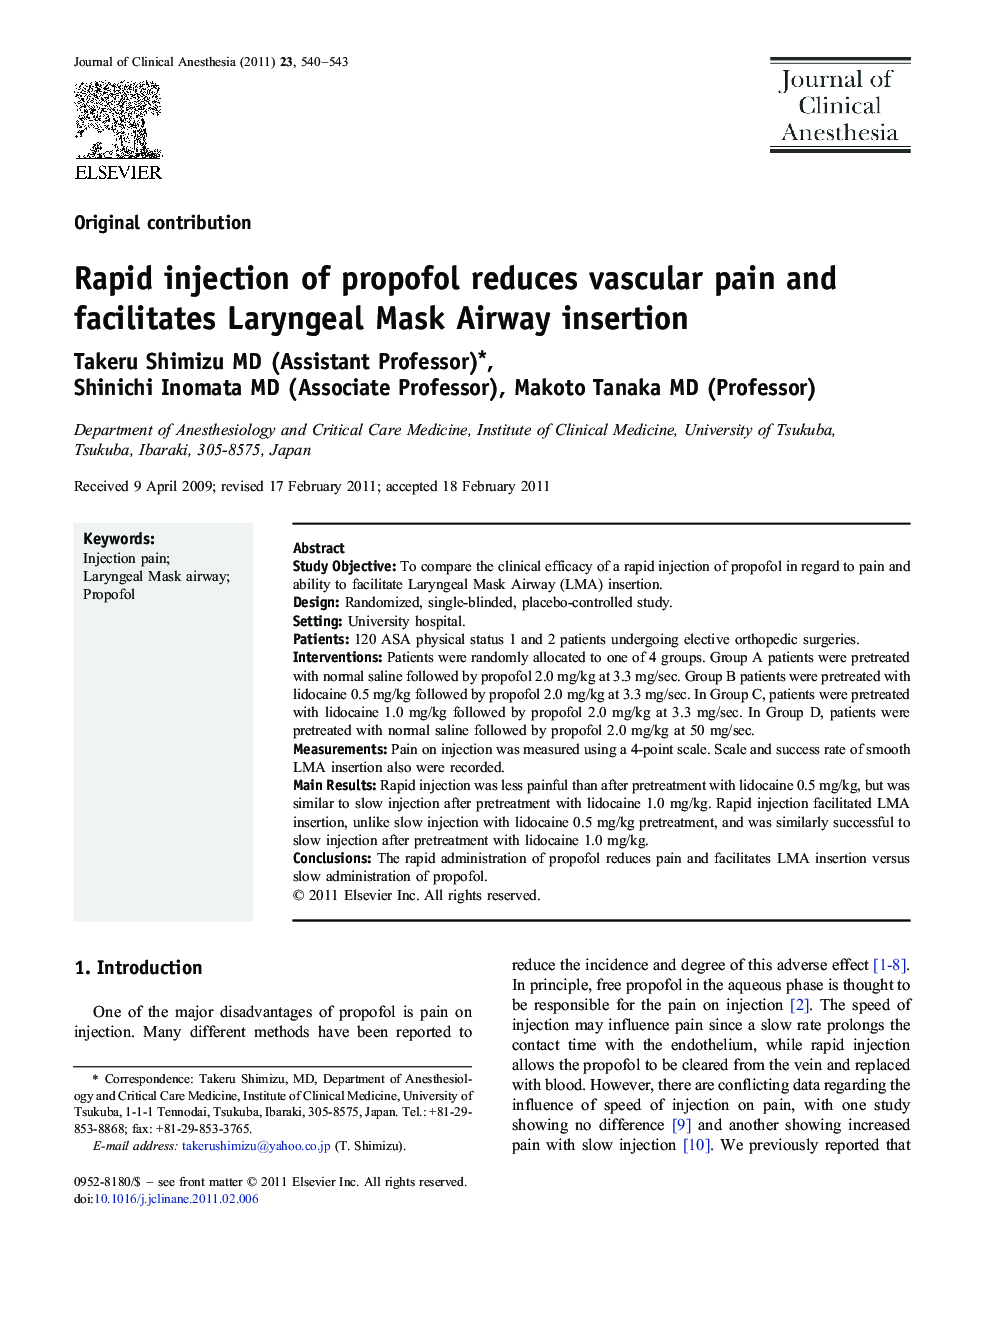 Rapid injection of propofol reduces vascular pain and facilitates Laryngeal Mask Airway insertion